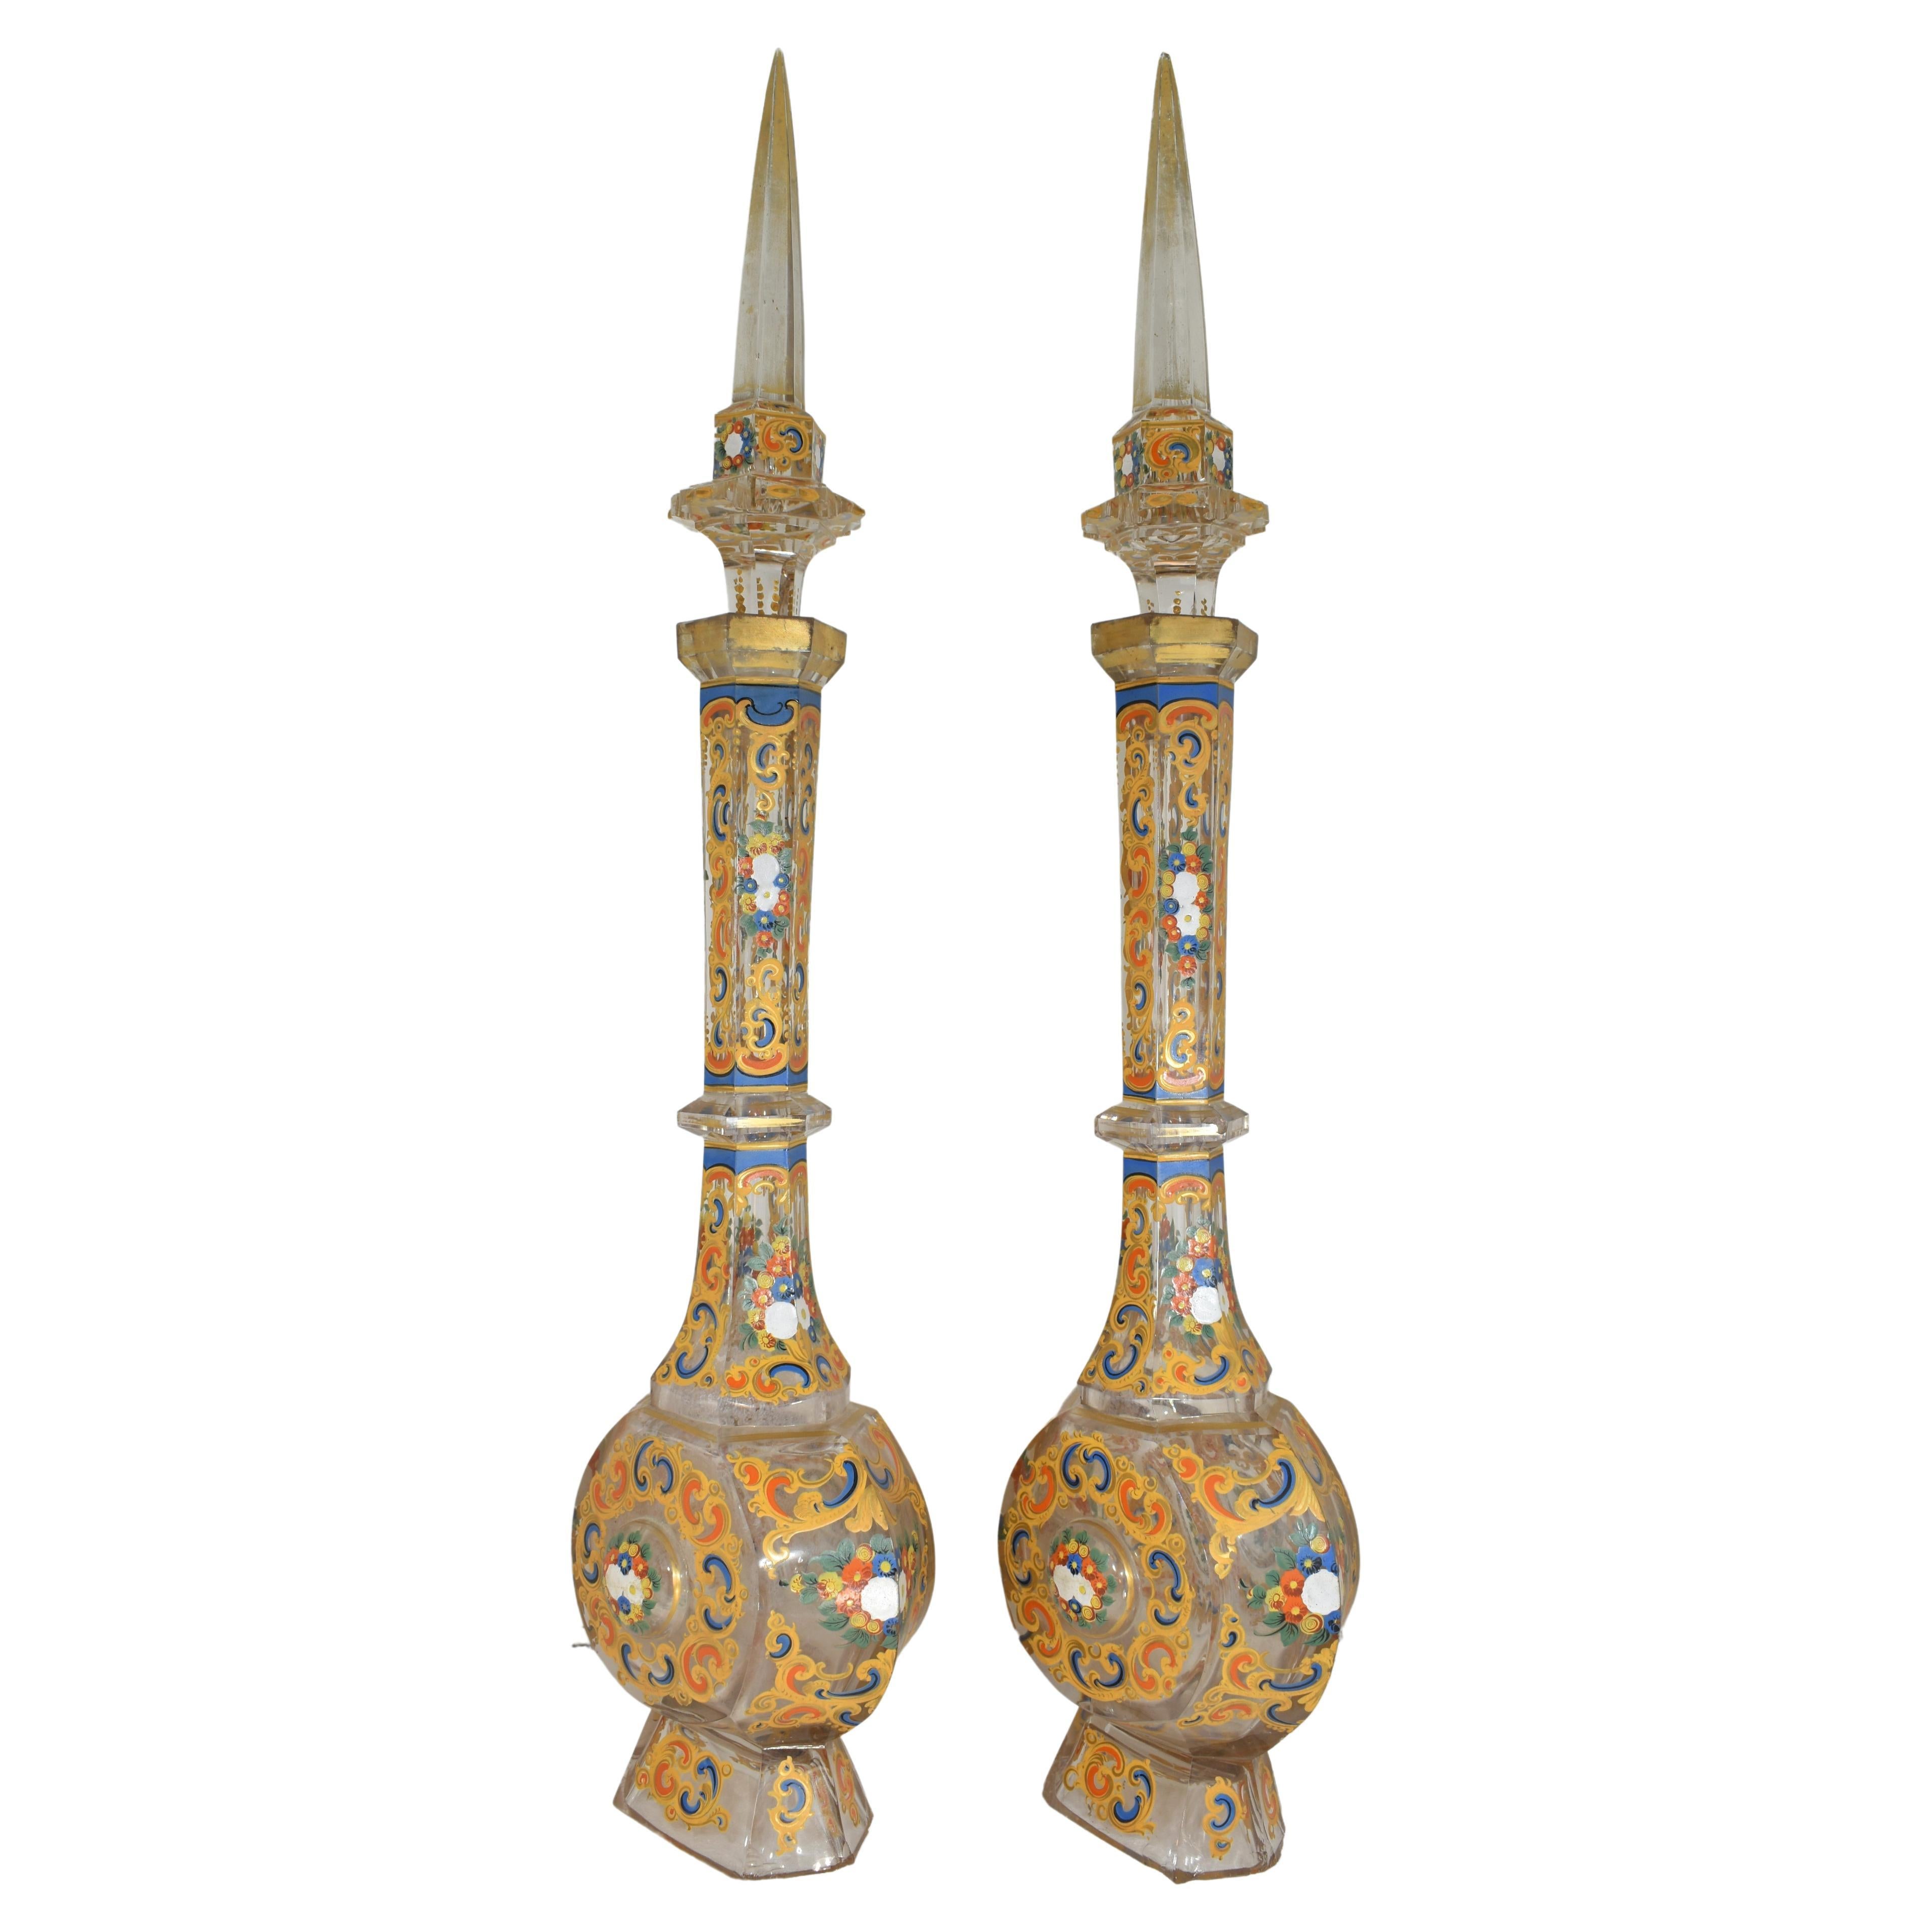 Czech Pair of Enamelled Cut-Glass Decanters, Bohemian for Ottoman Market 19th Century For Sale